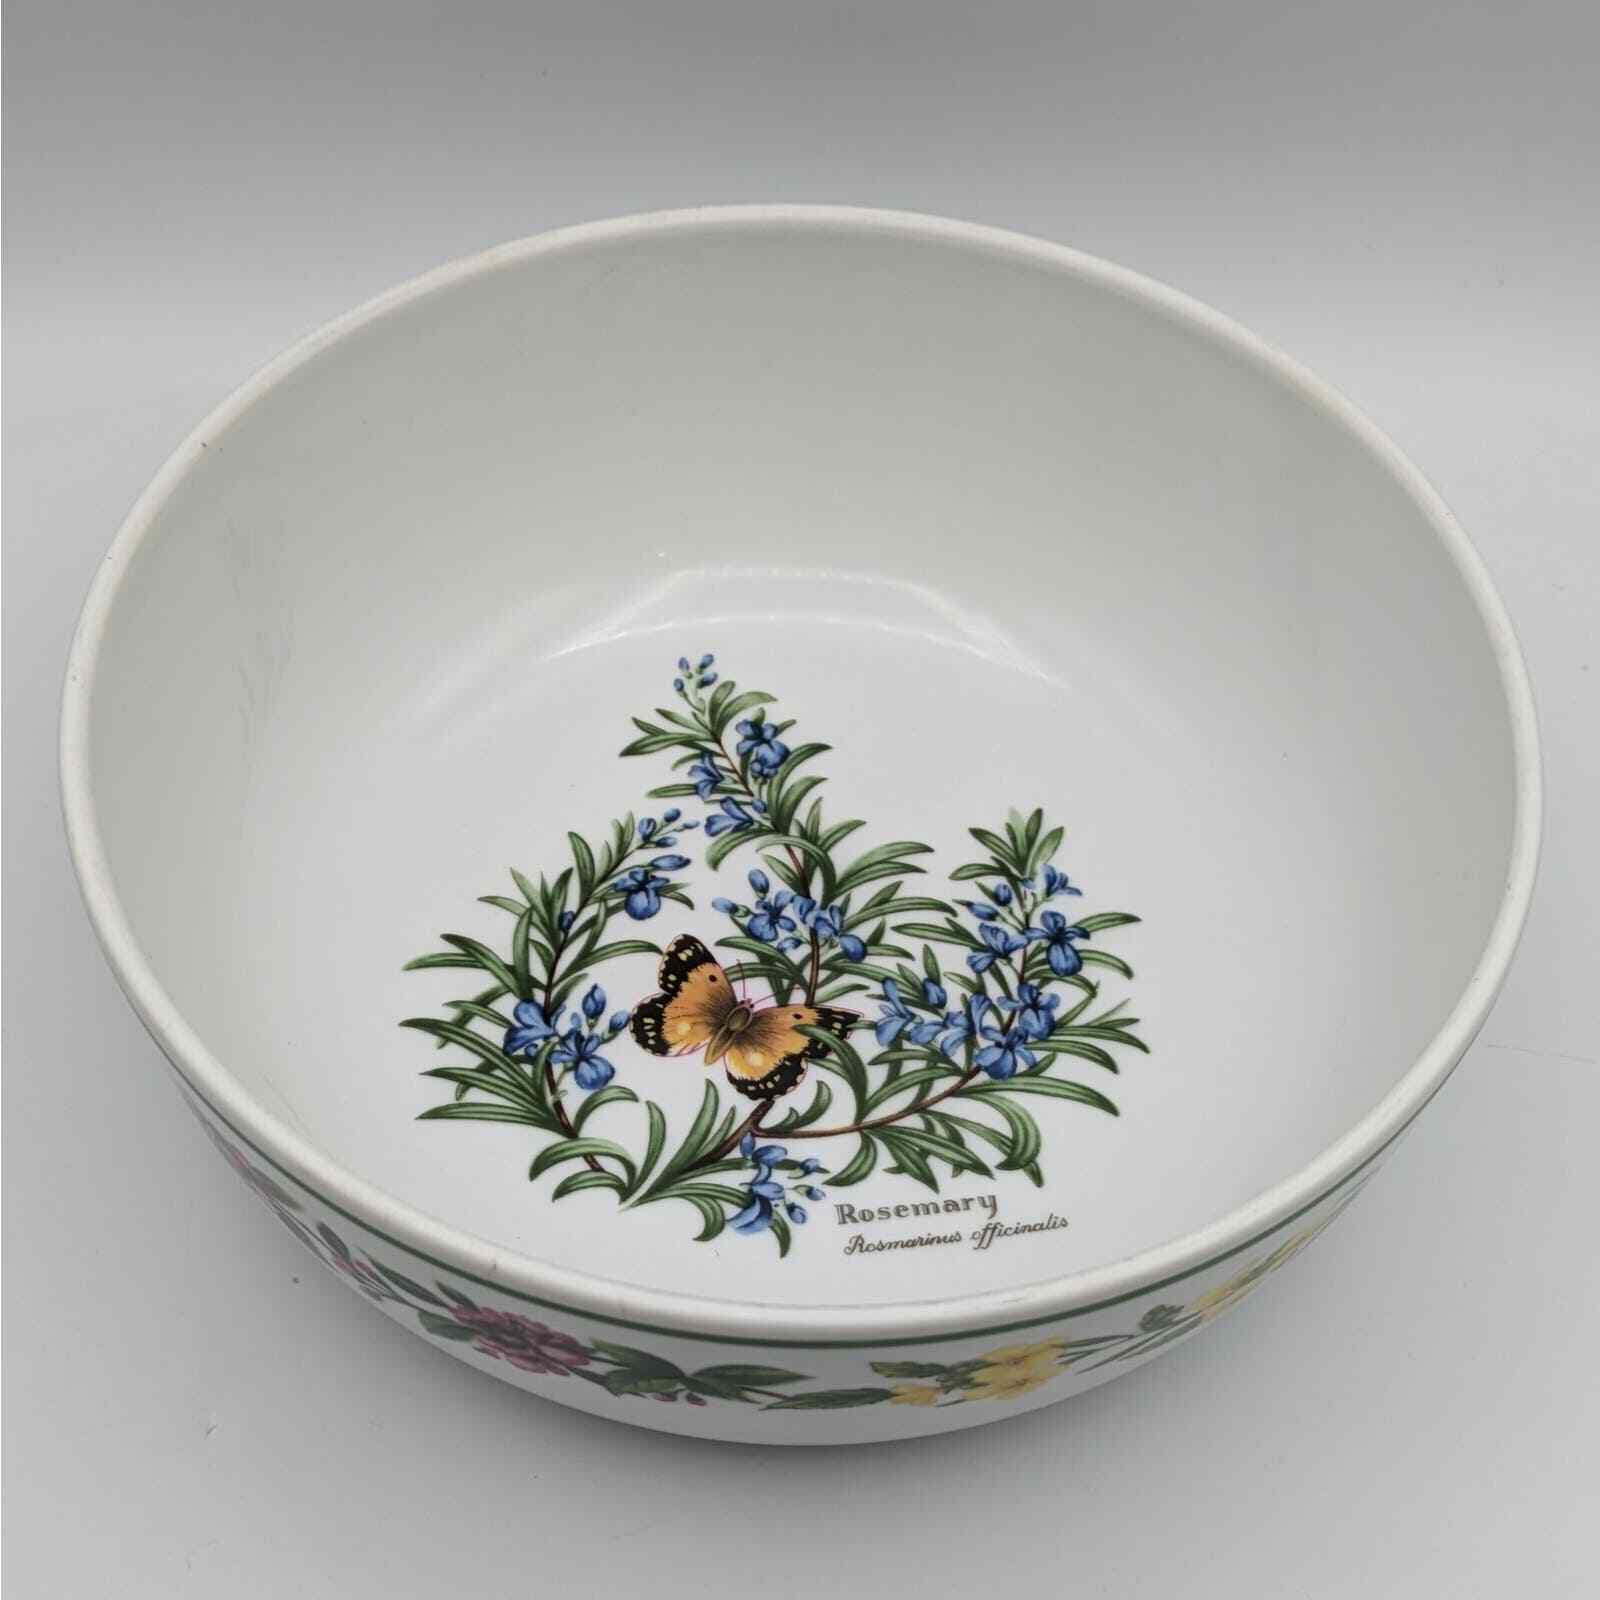 Rare Vtg 1990 Royal Worcester Herbs Porcelain Replacement Rosemary LARGE Bowl 